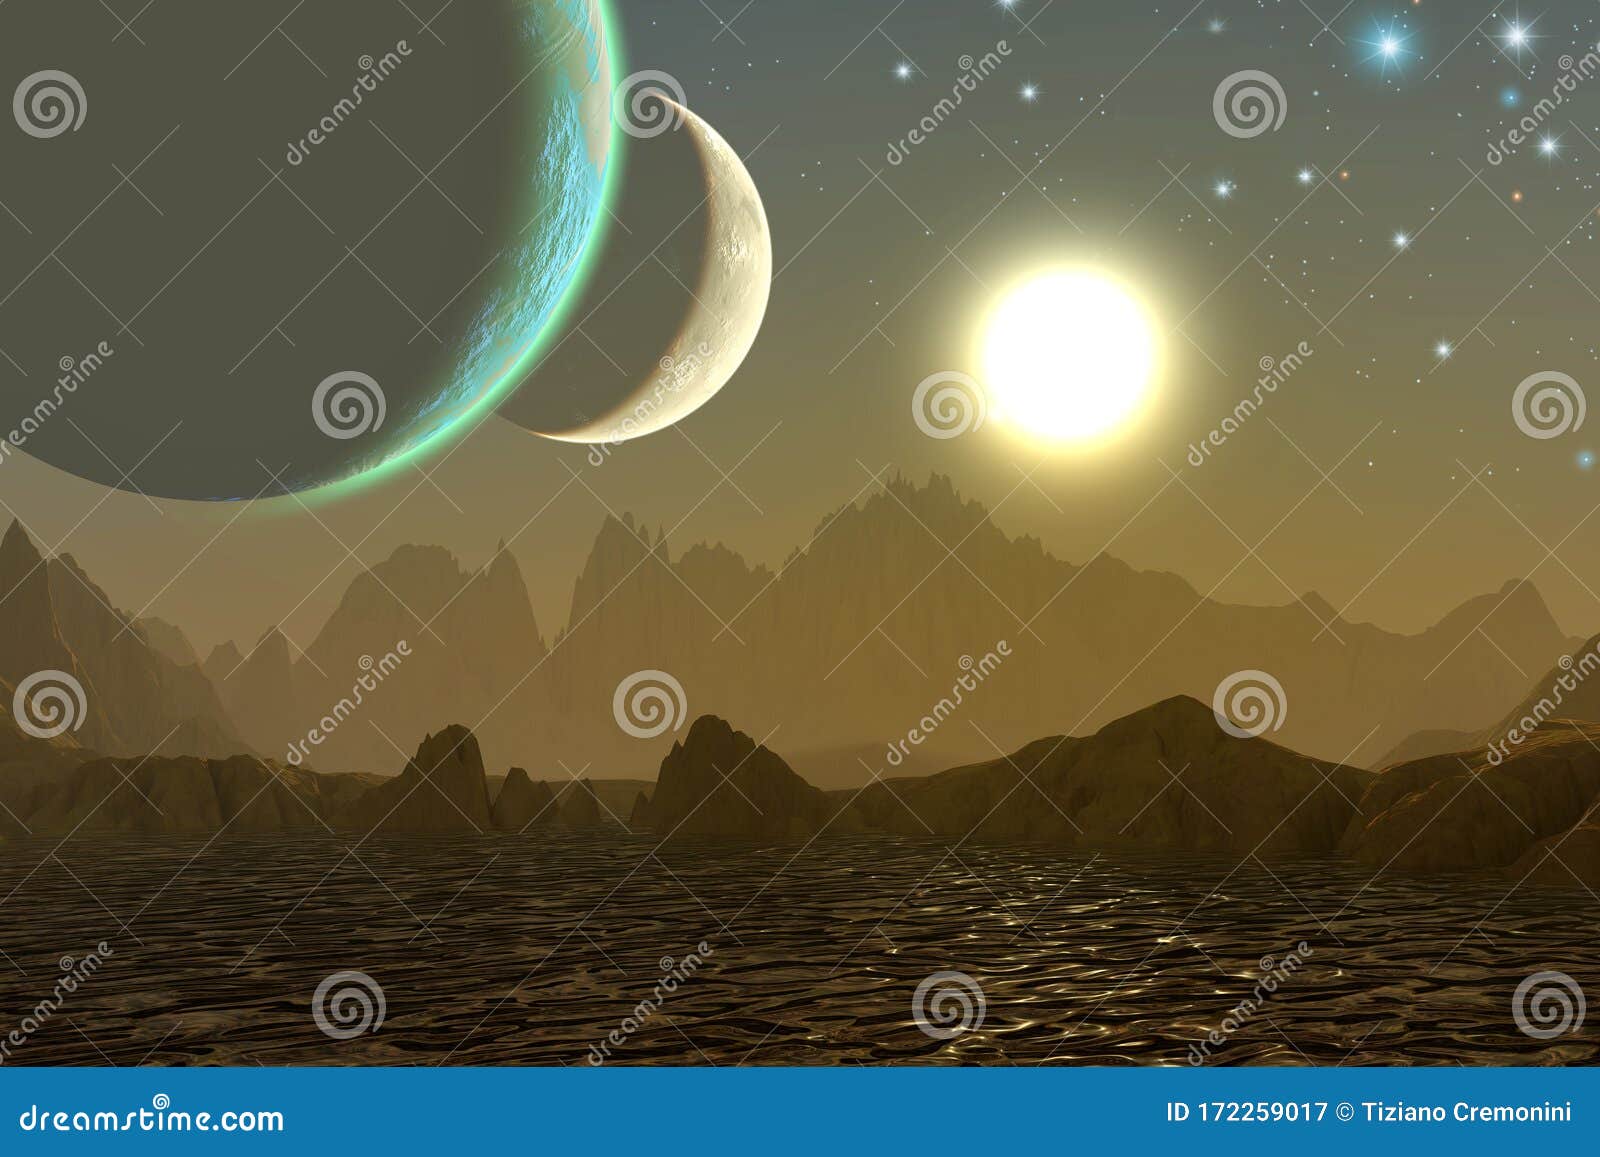 alien landscape, planetary system with two moons, mountains and sea with sun, 3d 